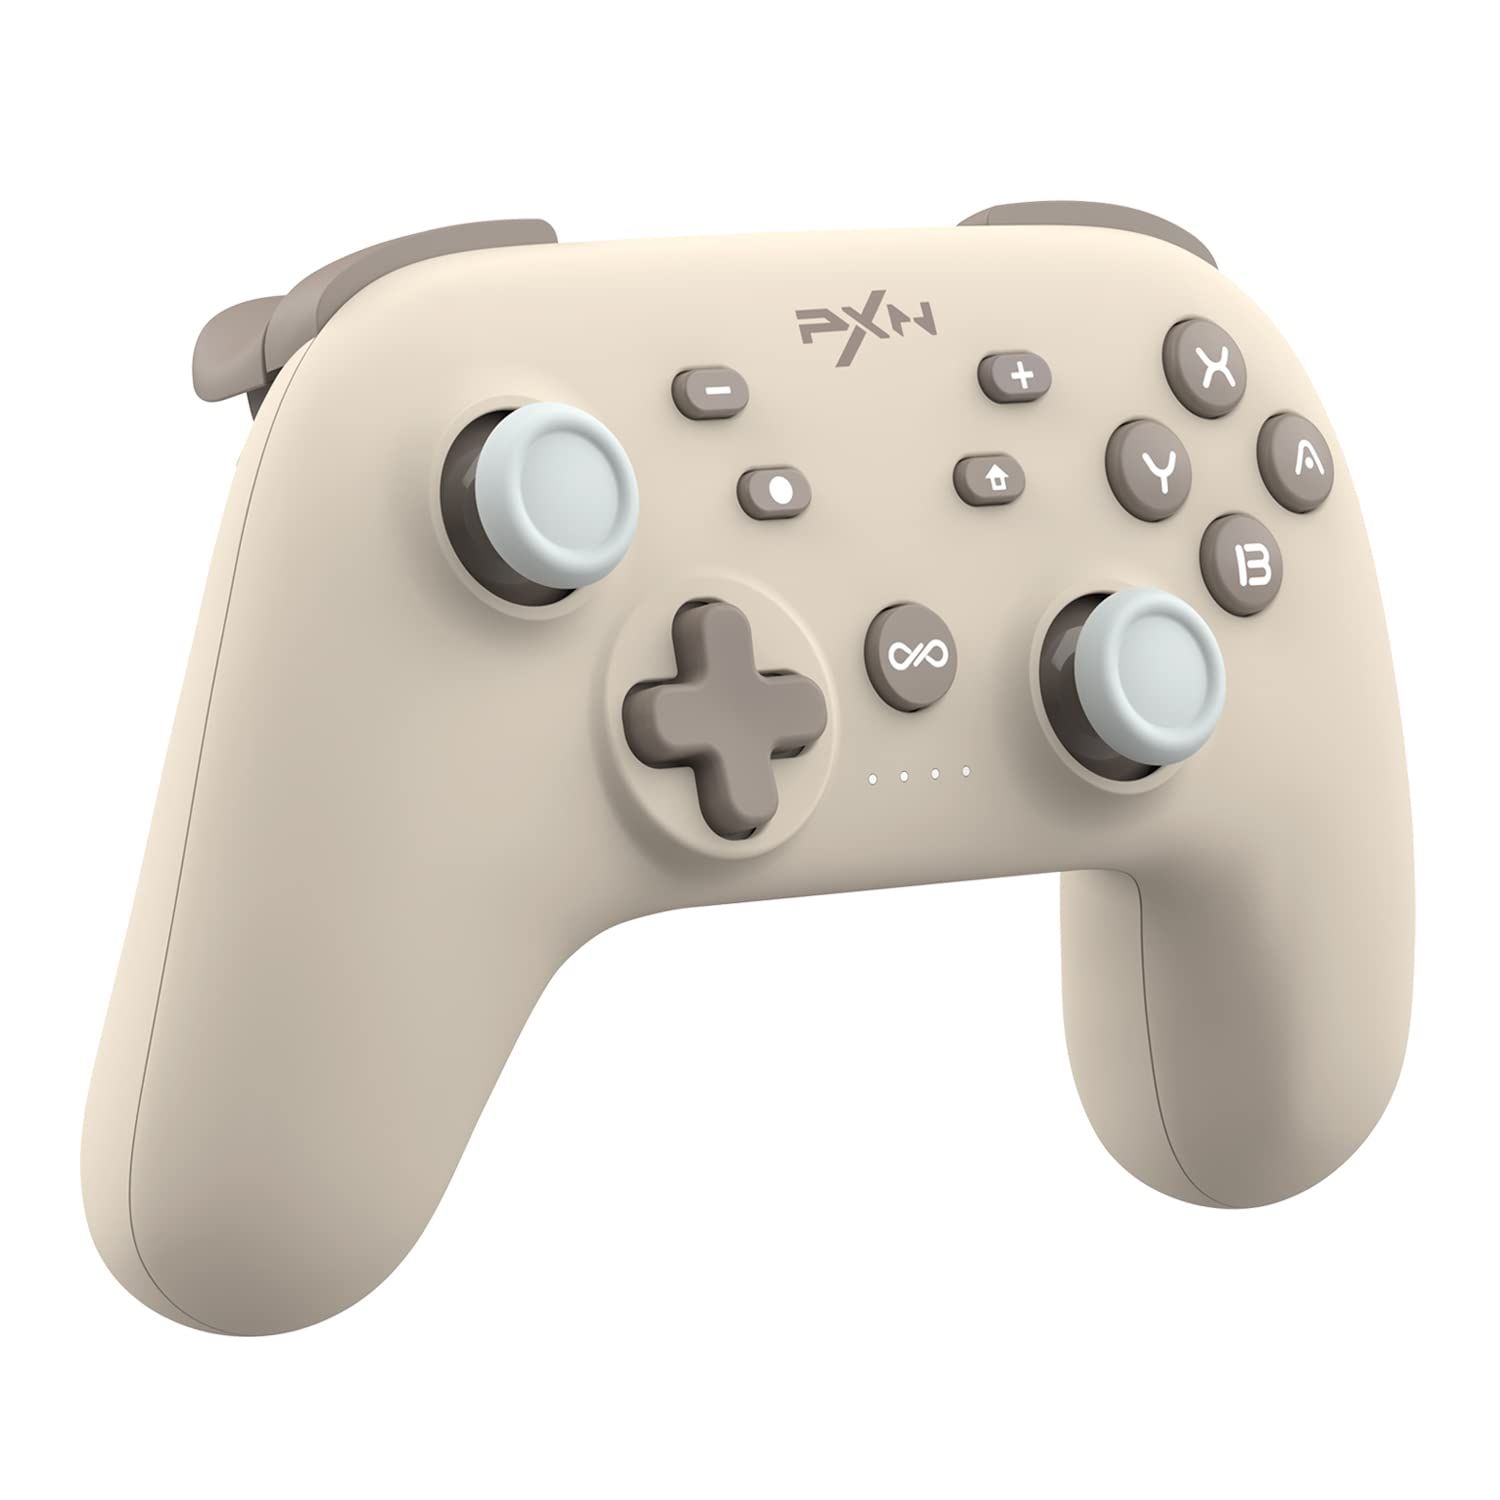 8BitDo Ultimate C Wired Controller has a simplified & pastel design